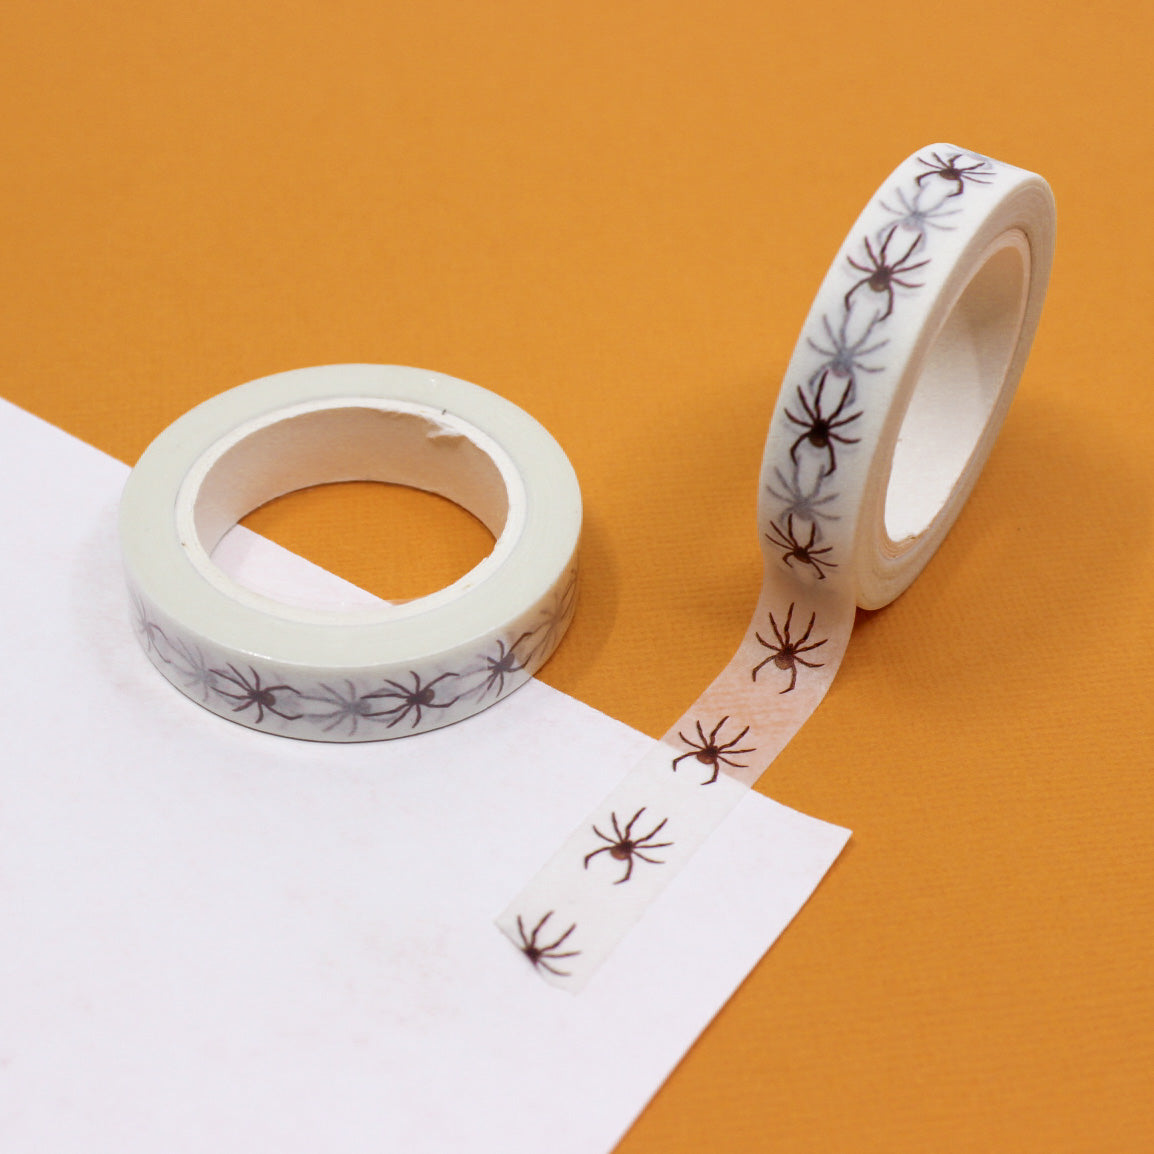 Embrace the spookiness of Halloween with our Spooky Spider Halloween Washi Tape, adorned with creepy spider illustrations. Ideal for adding a thrilling and eerie touch to your projects. This tape is sold at BBB Supplies Craft Shop.